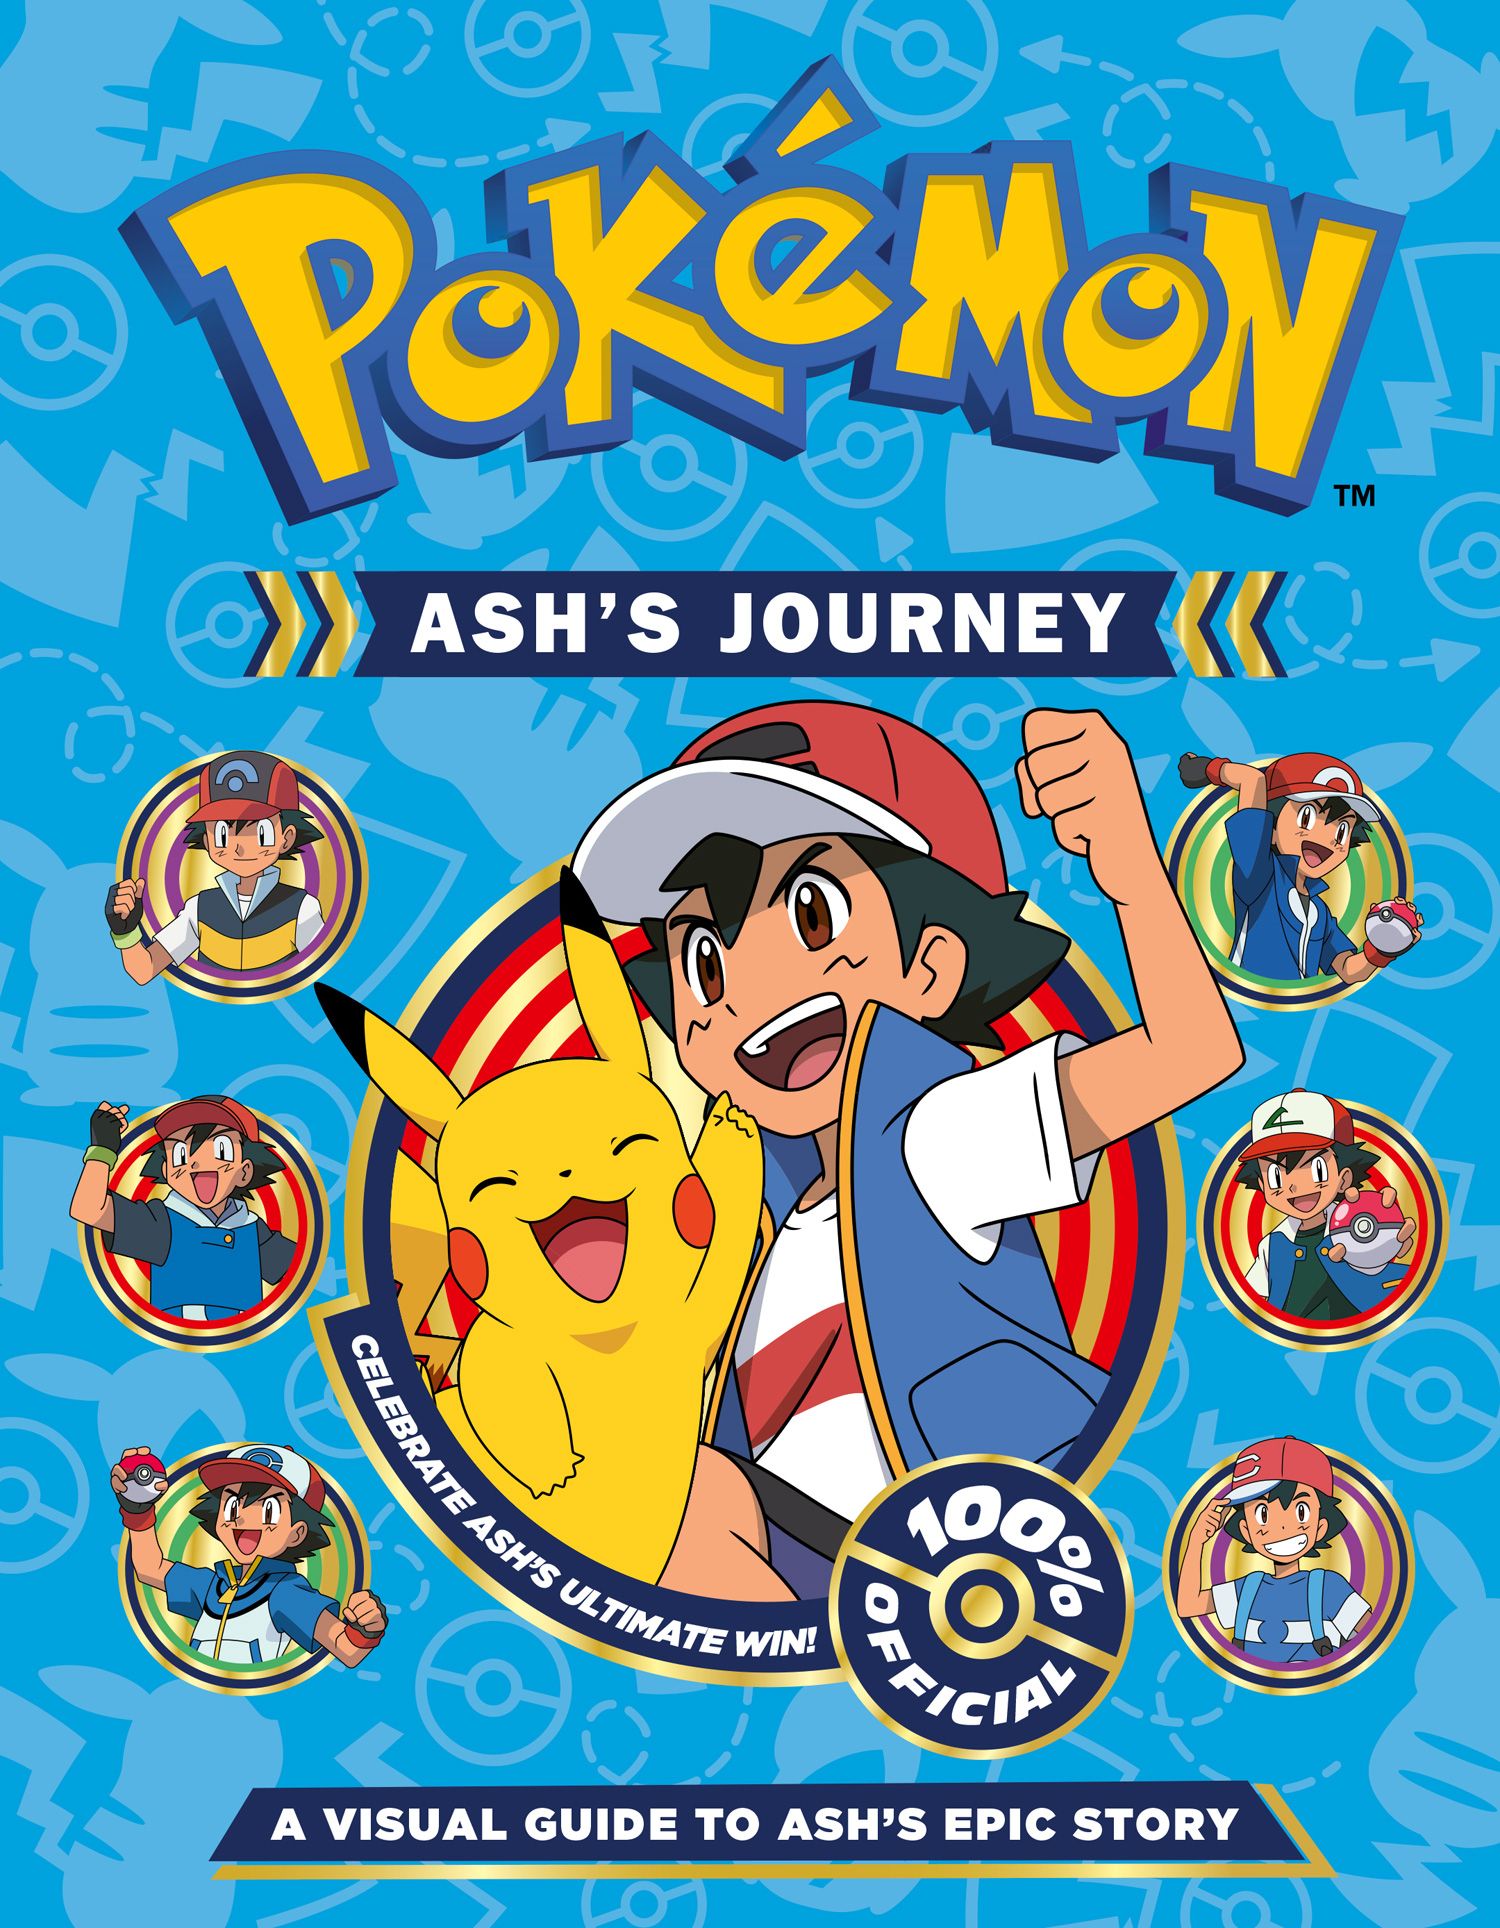 See New Pokémon and Experience Alola to Commemorate Release of